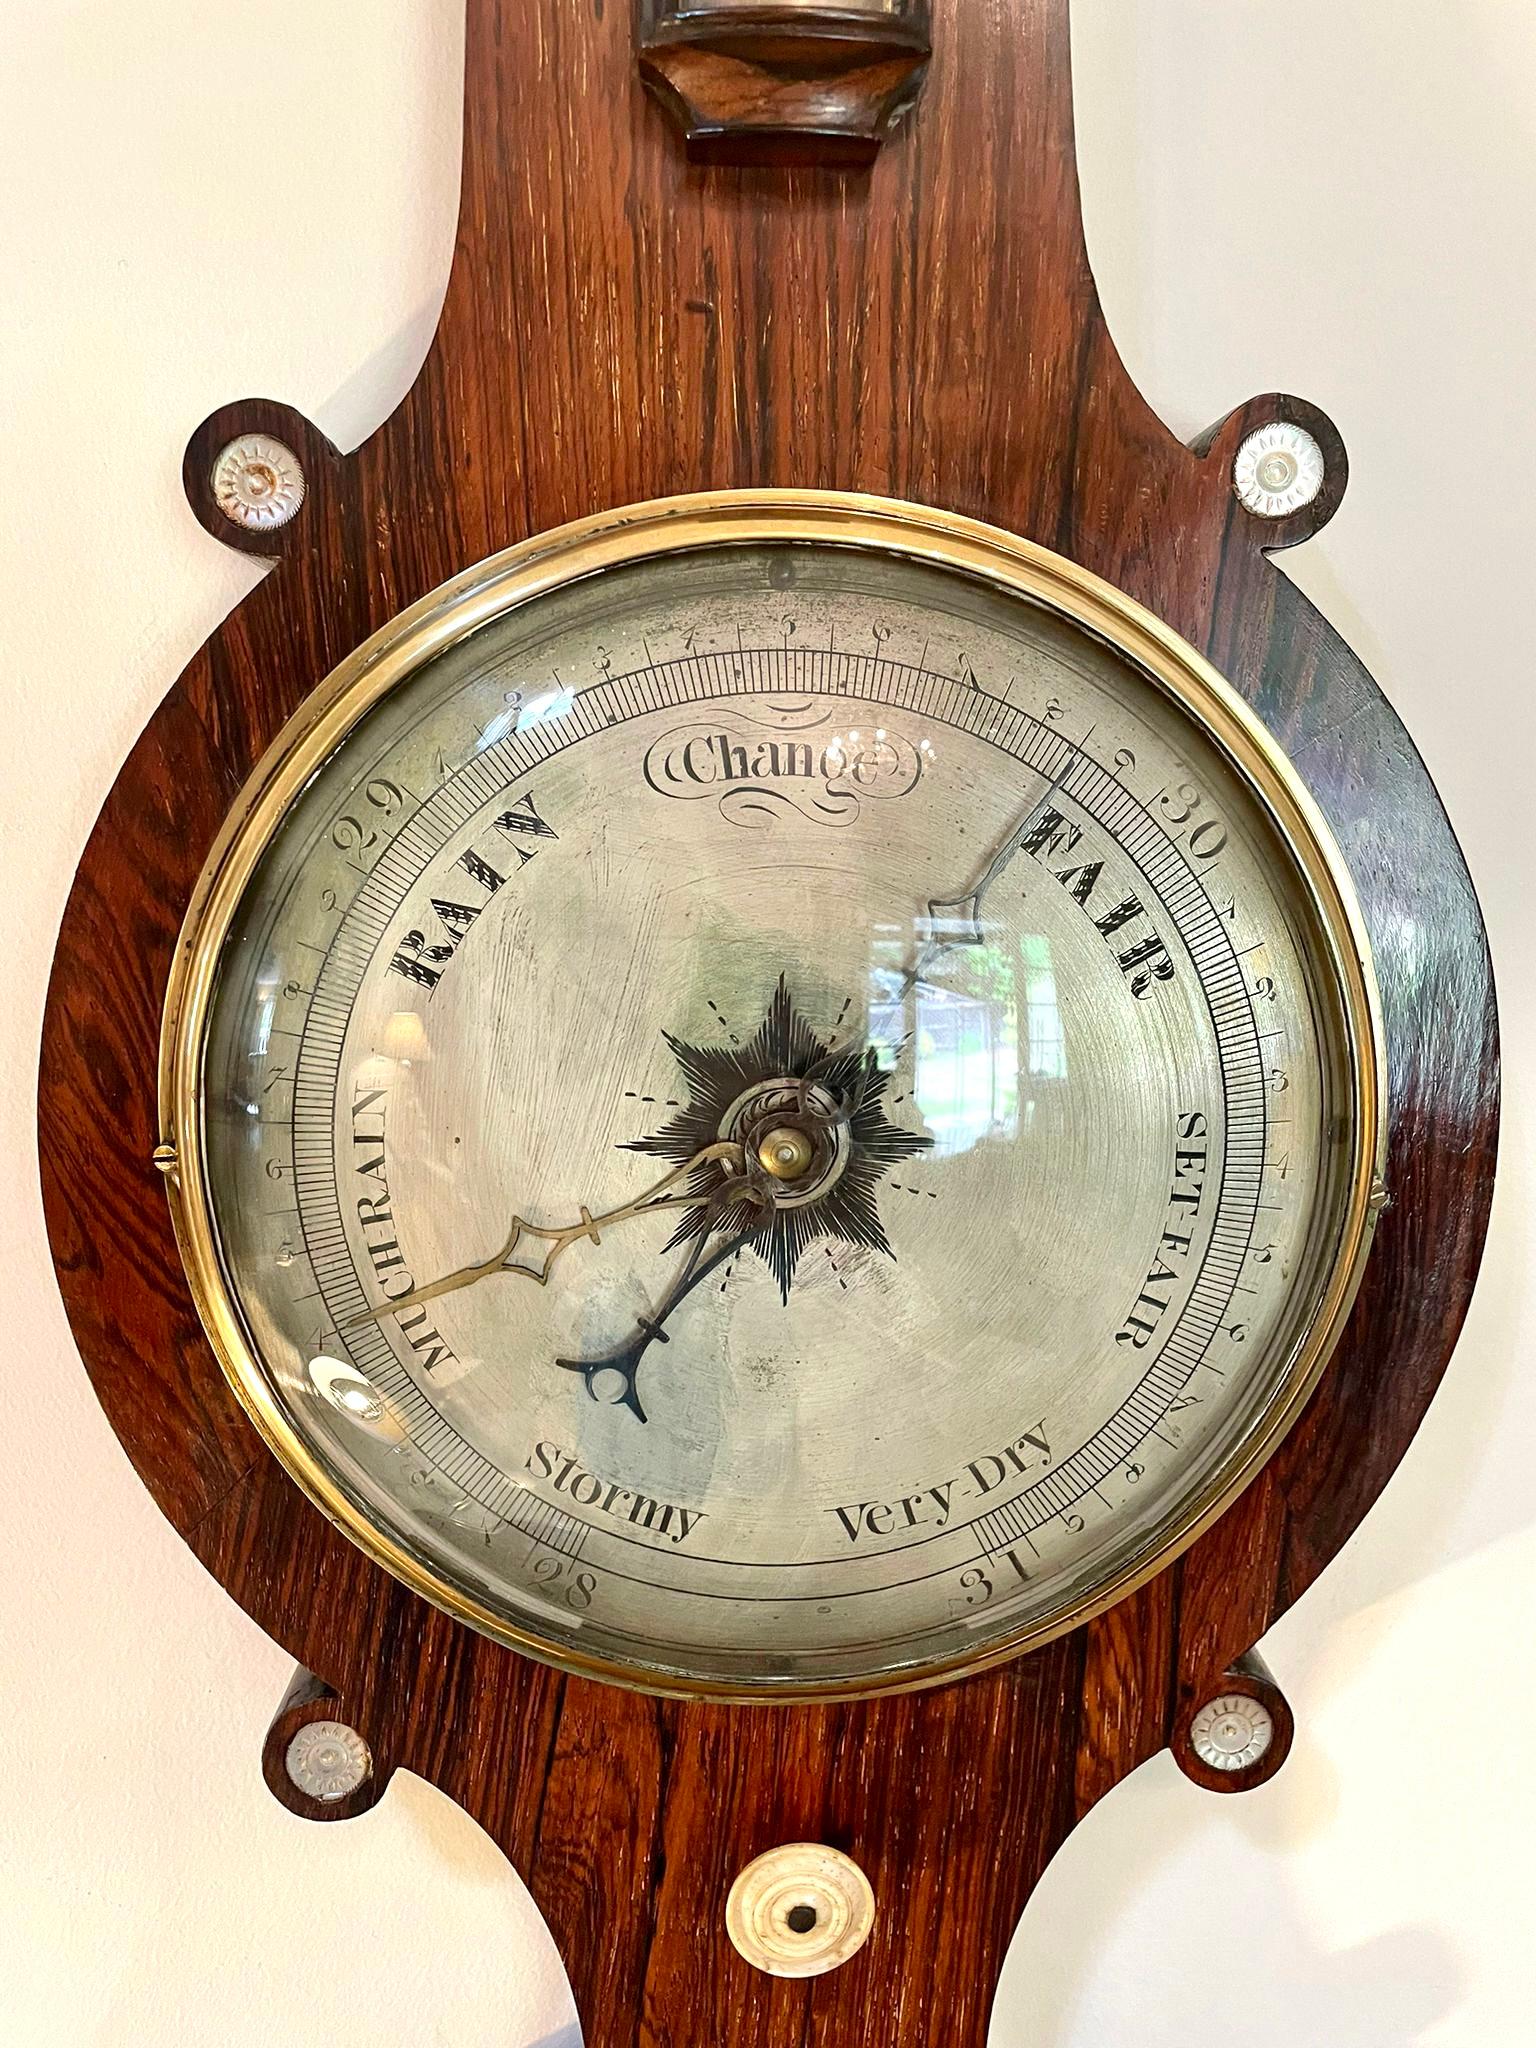 Antique 19th century rosewood banjo barometer having a quality rosewood inlaid Mother of Pearl case with an Onion shaped top, nine inch silvered engraved dial with original hands, a thermometer, fitted hygrometer, glass fronted spirit level and a